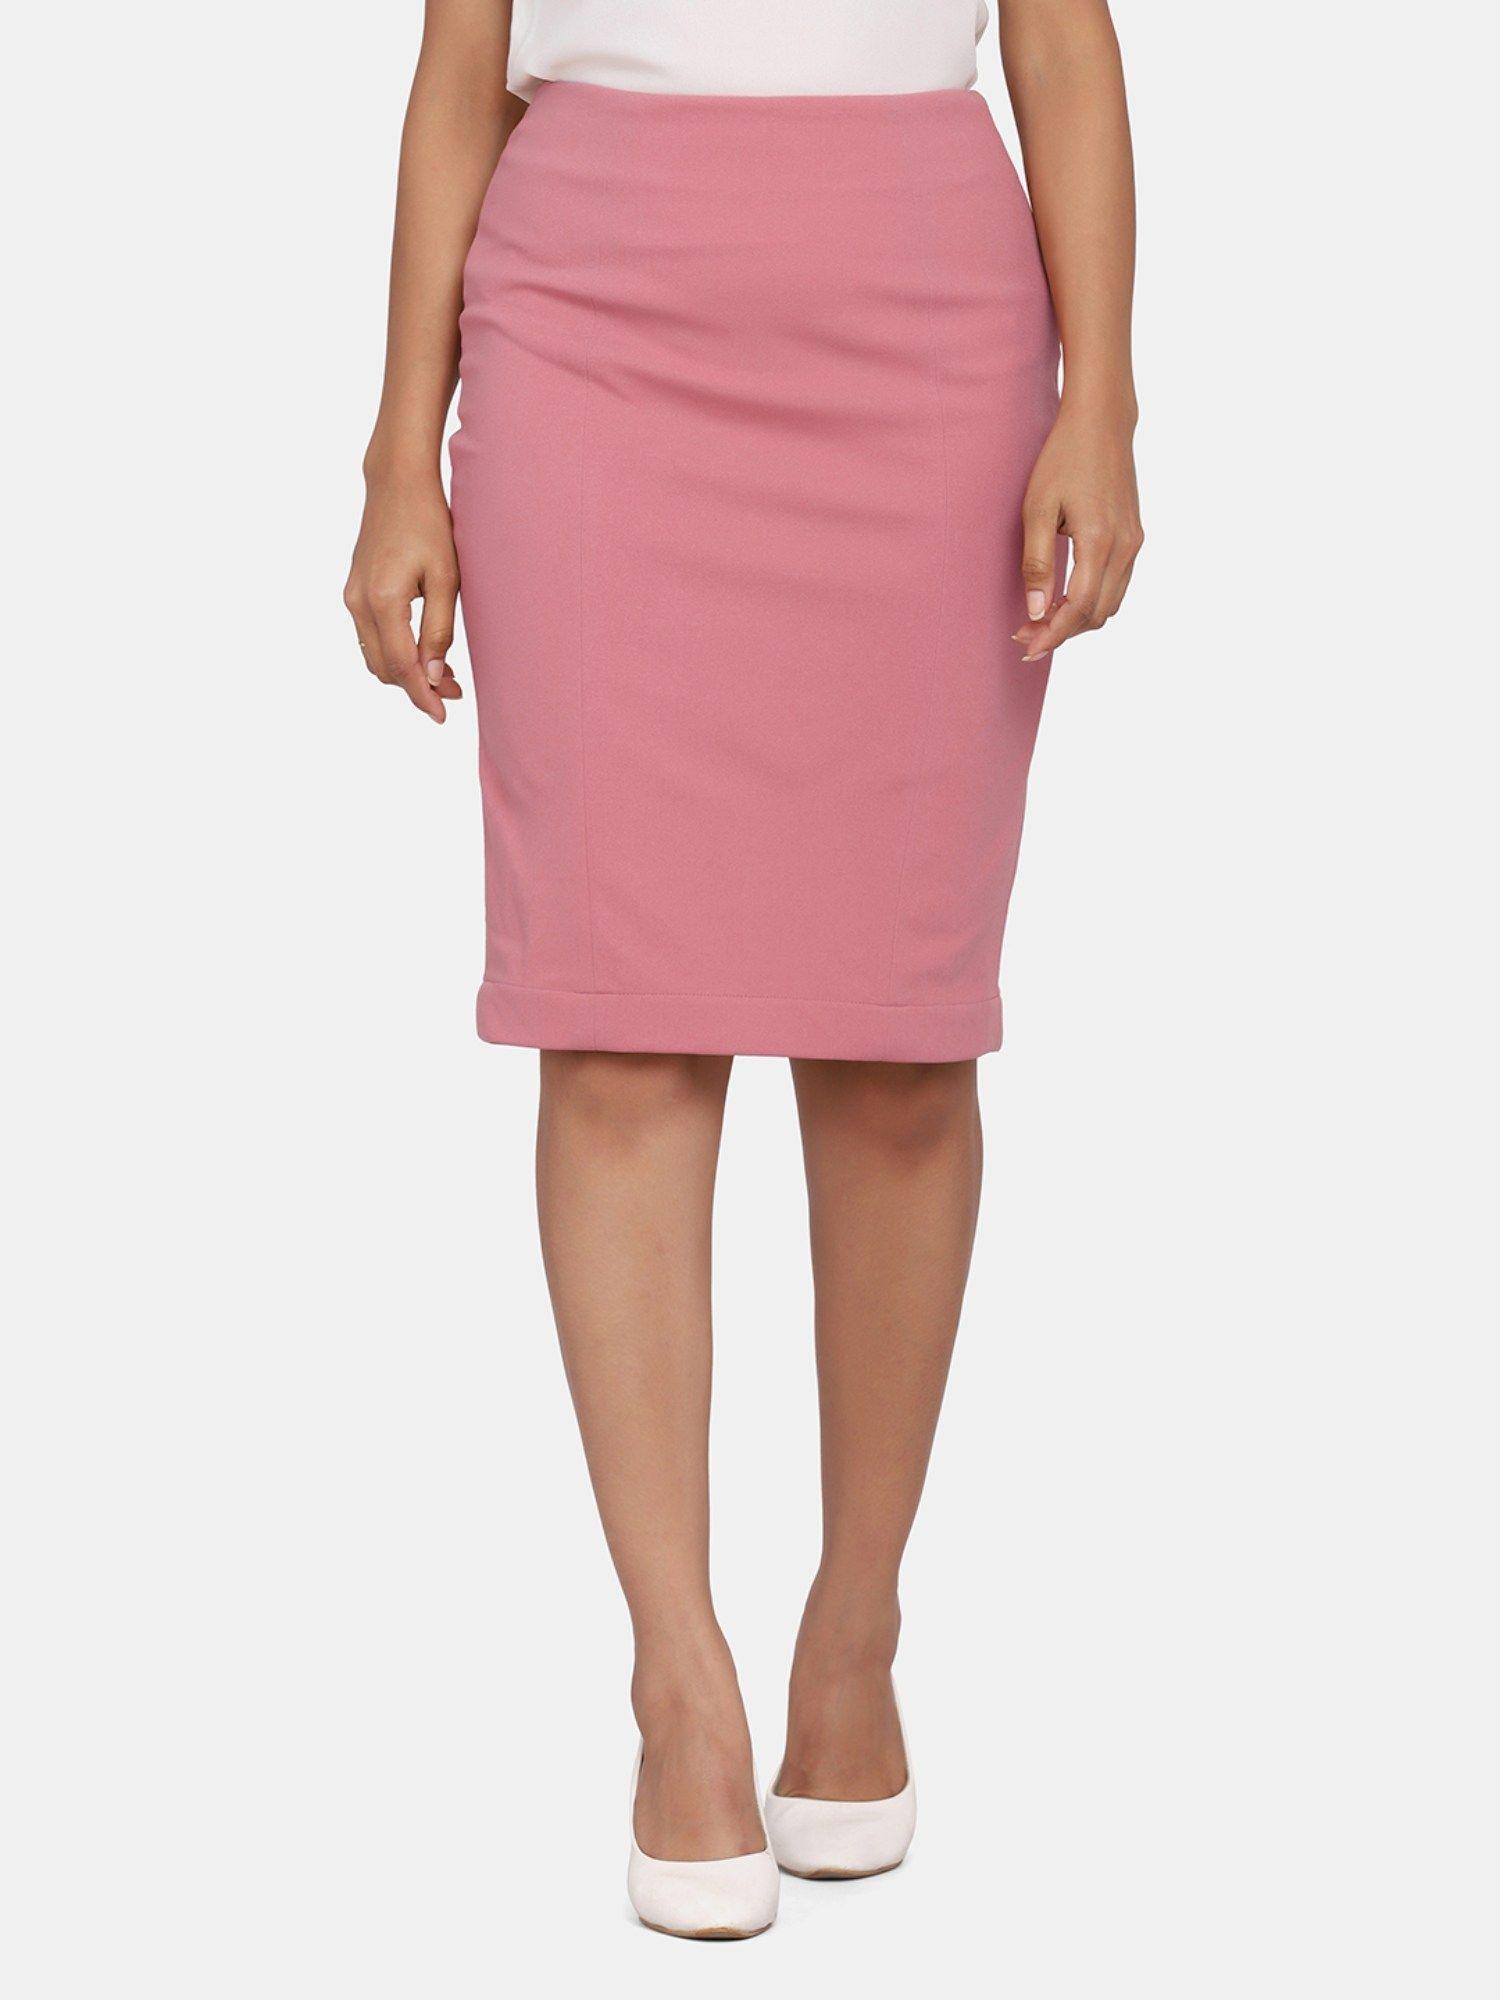 stretch pencil skirt for office pink